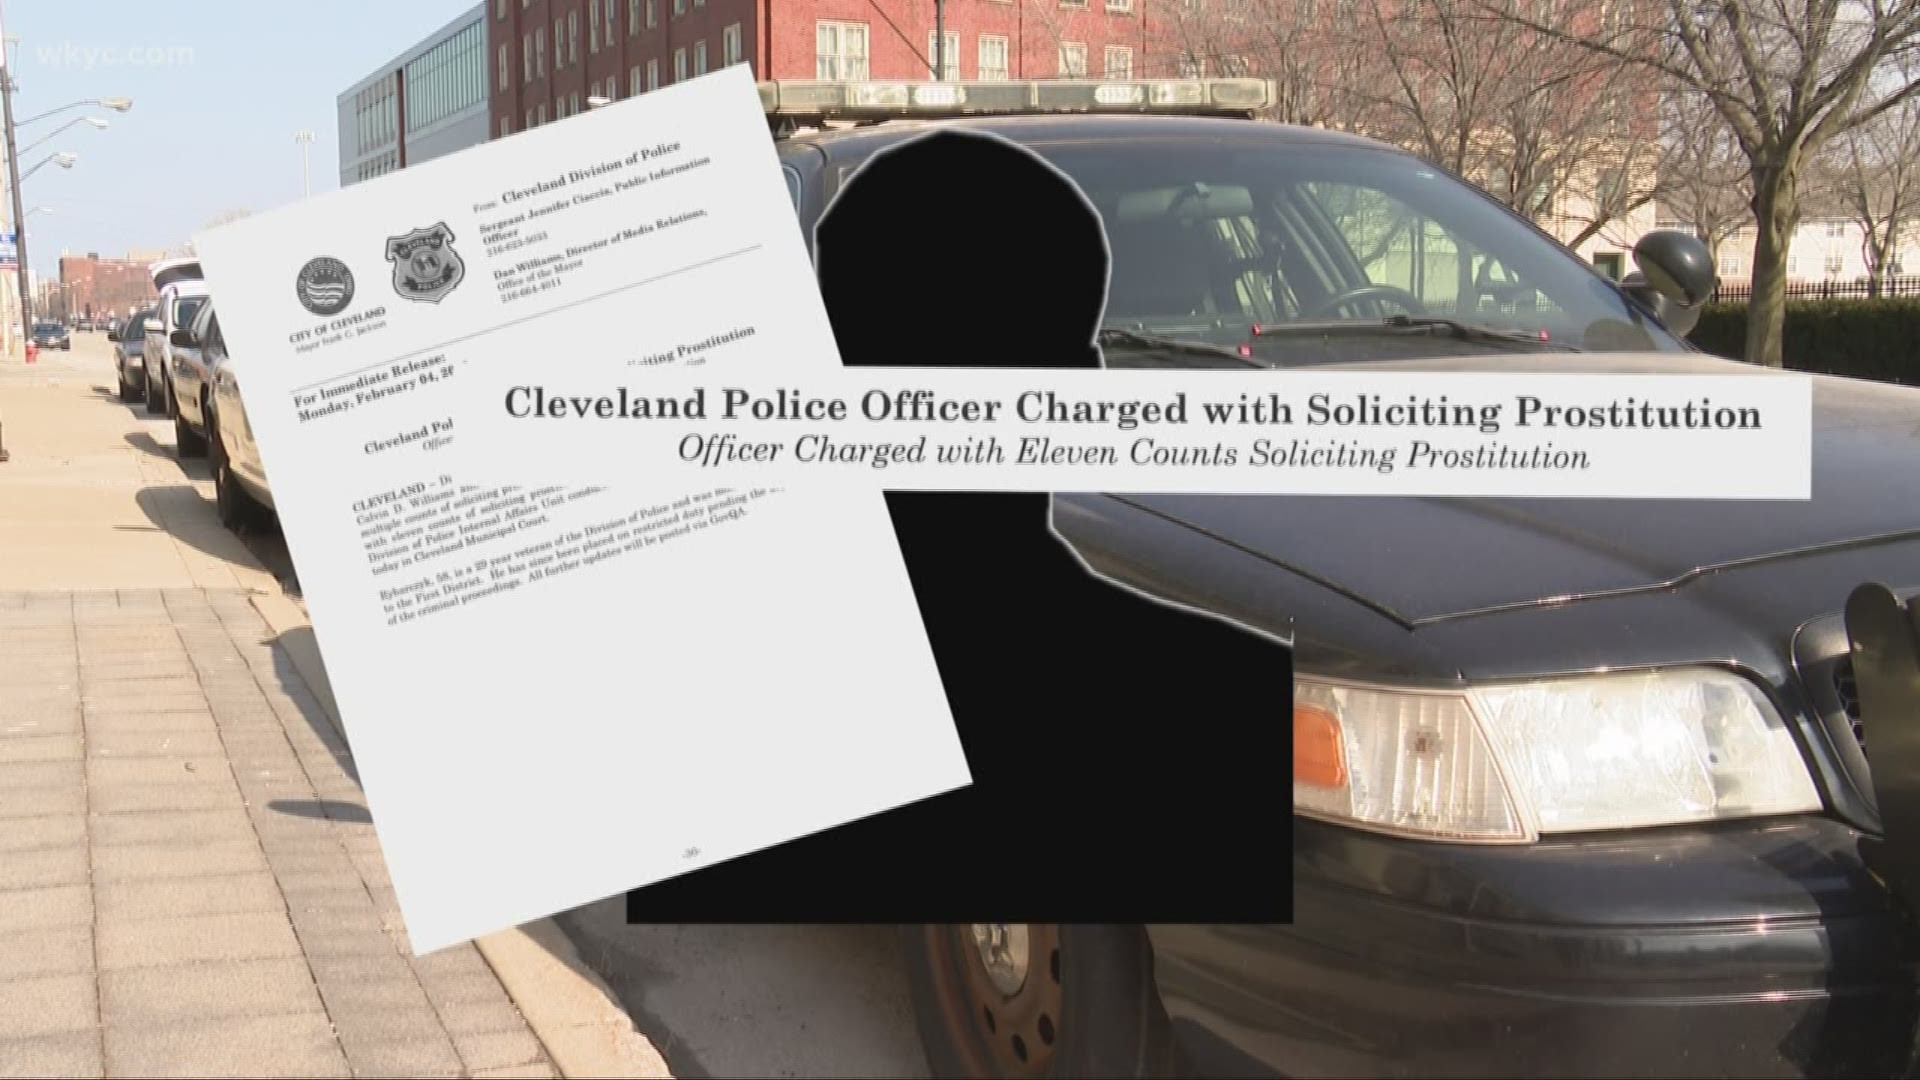 More details on Cleveland Police officer charged with soliciting